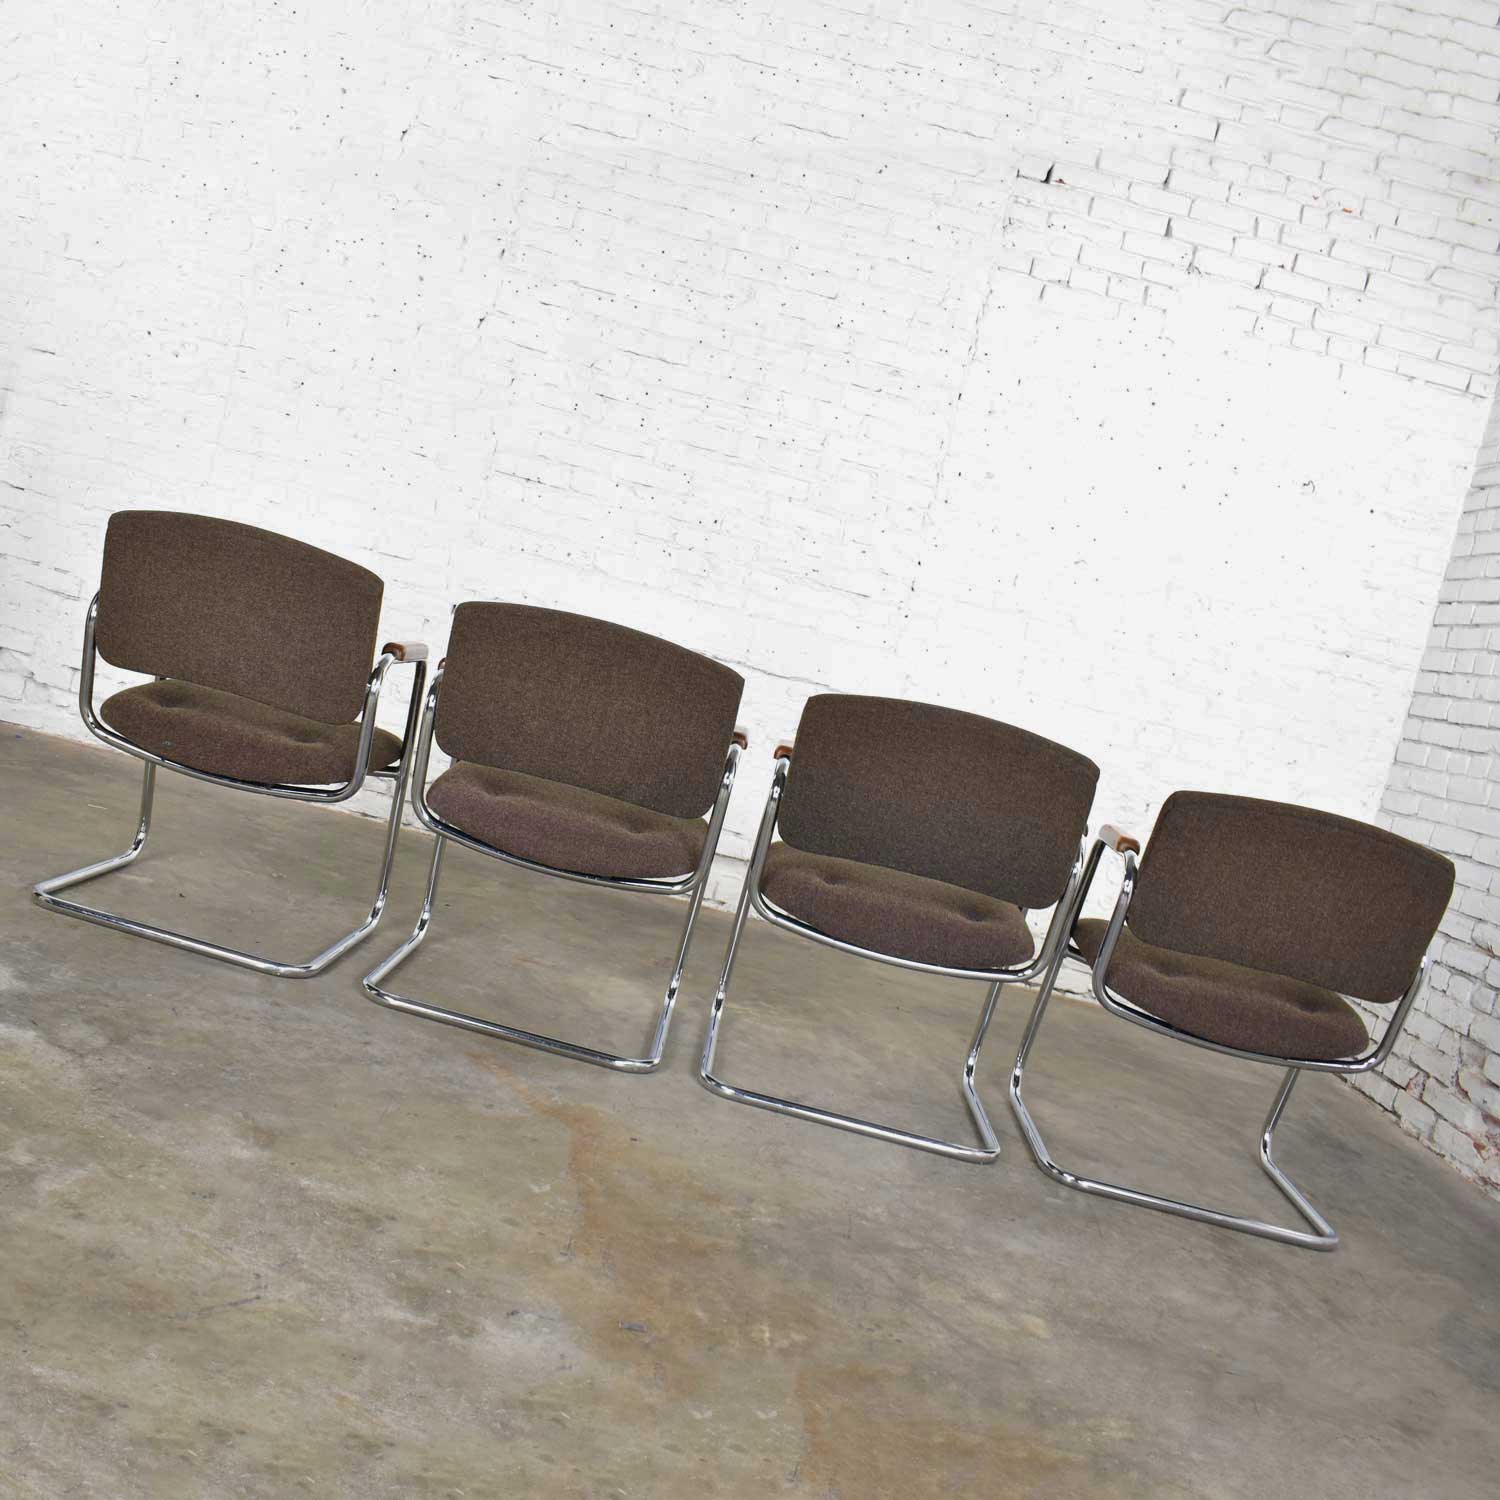 Set 4 Cantilever Armchairs Chrome and Brown w/ Wood Arms Style of Steelcase or Pollack 1970